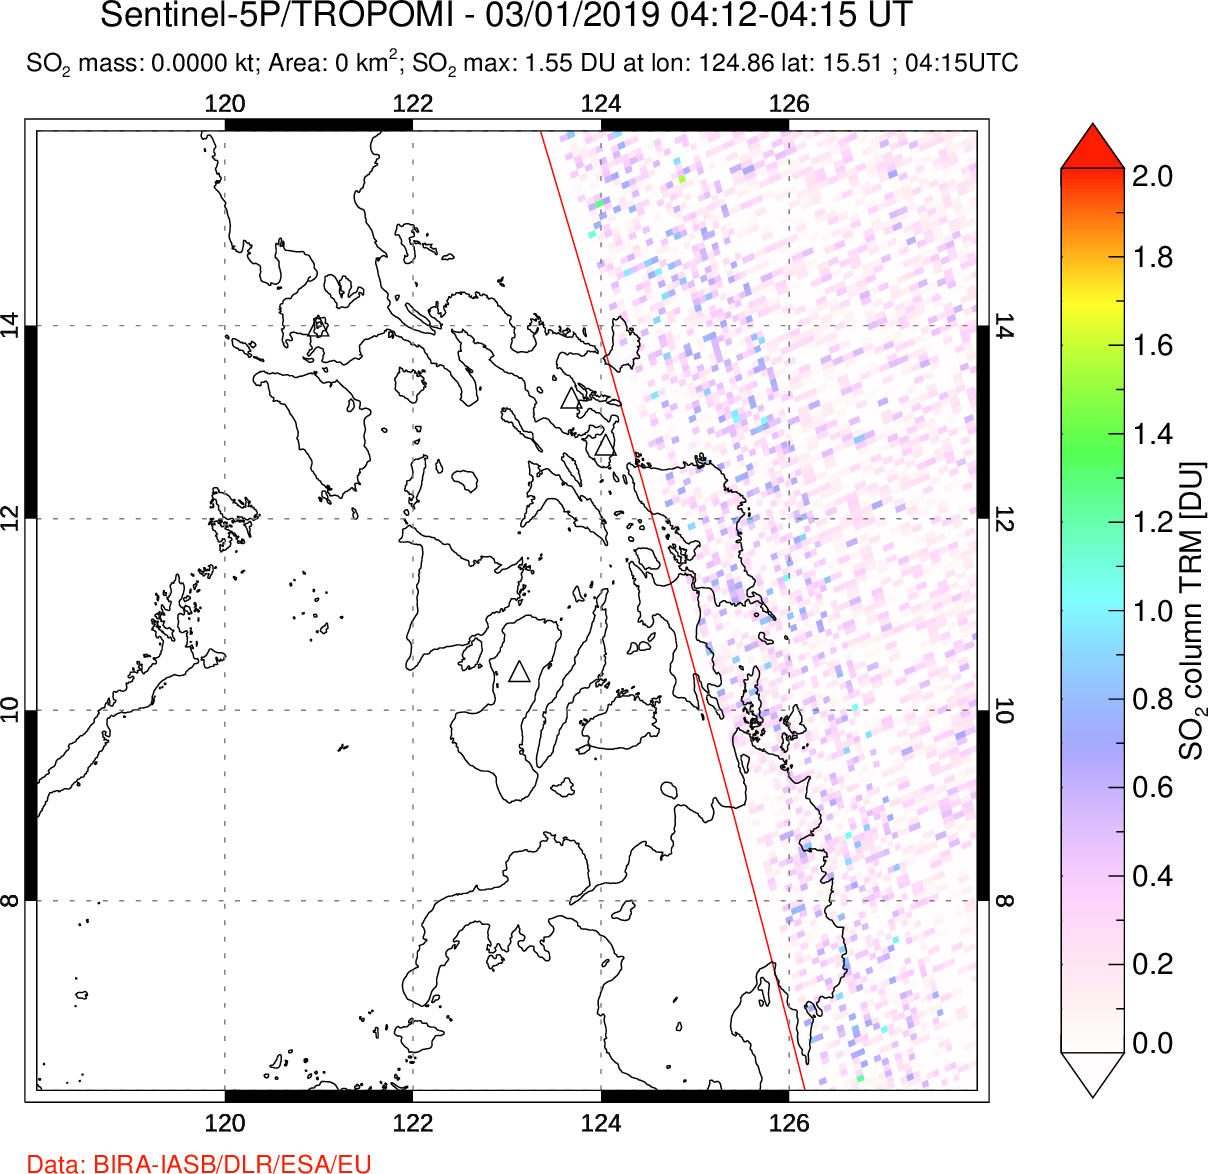 A sulfur dioxide image over Philippines on Mar 01, 2019.